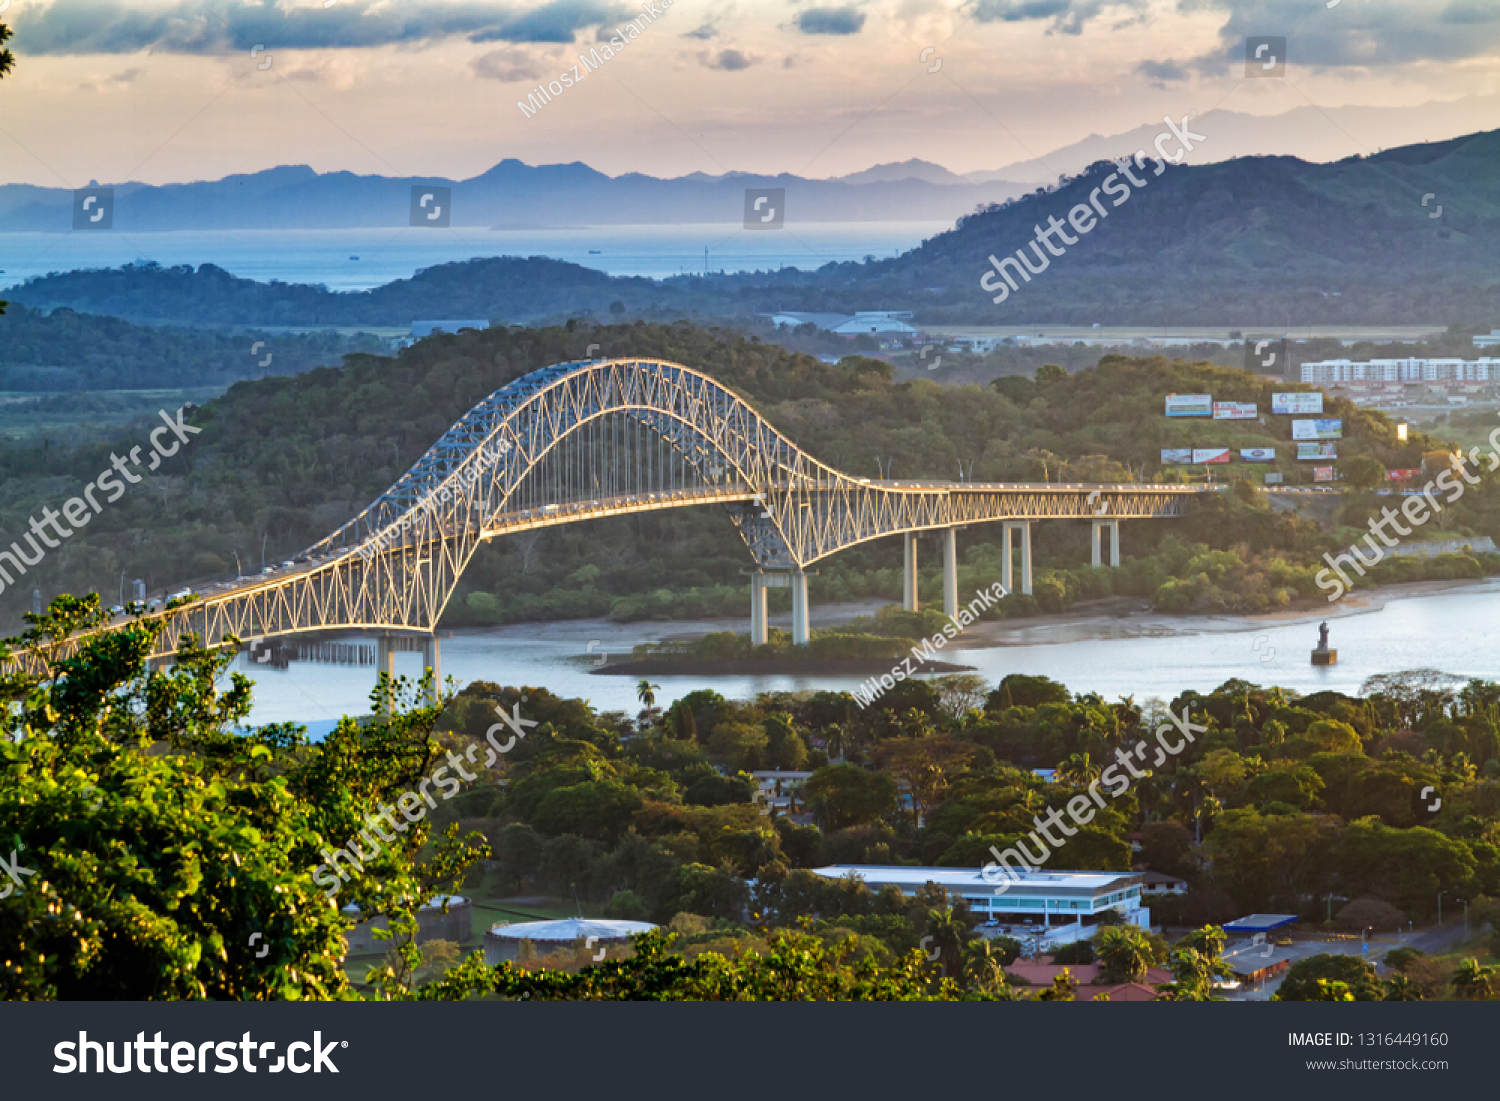 Panoramic aerial view of the Bridge of The Americas over the Panama Canal Pacific Entrance. Sunset scene with a gentle mist in the background. The bridge is spanning two continents - two Americas. #1316449160